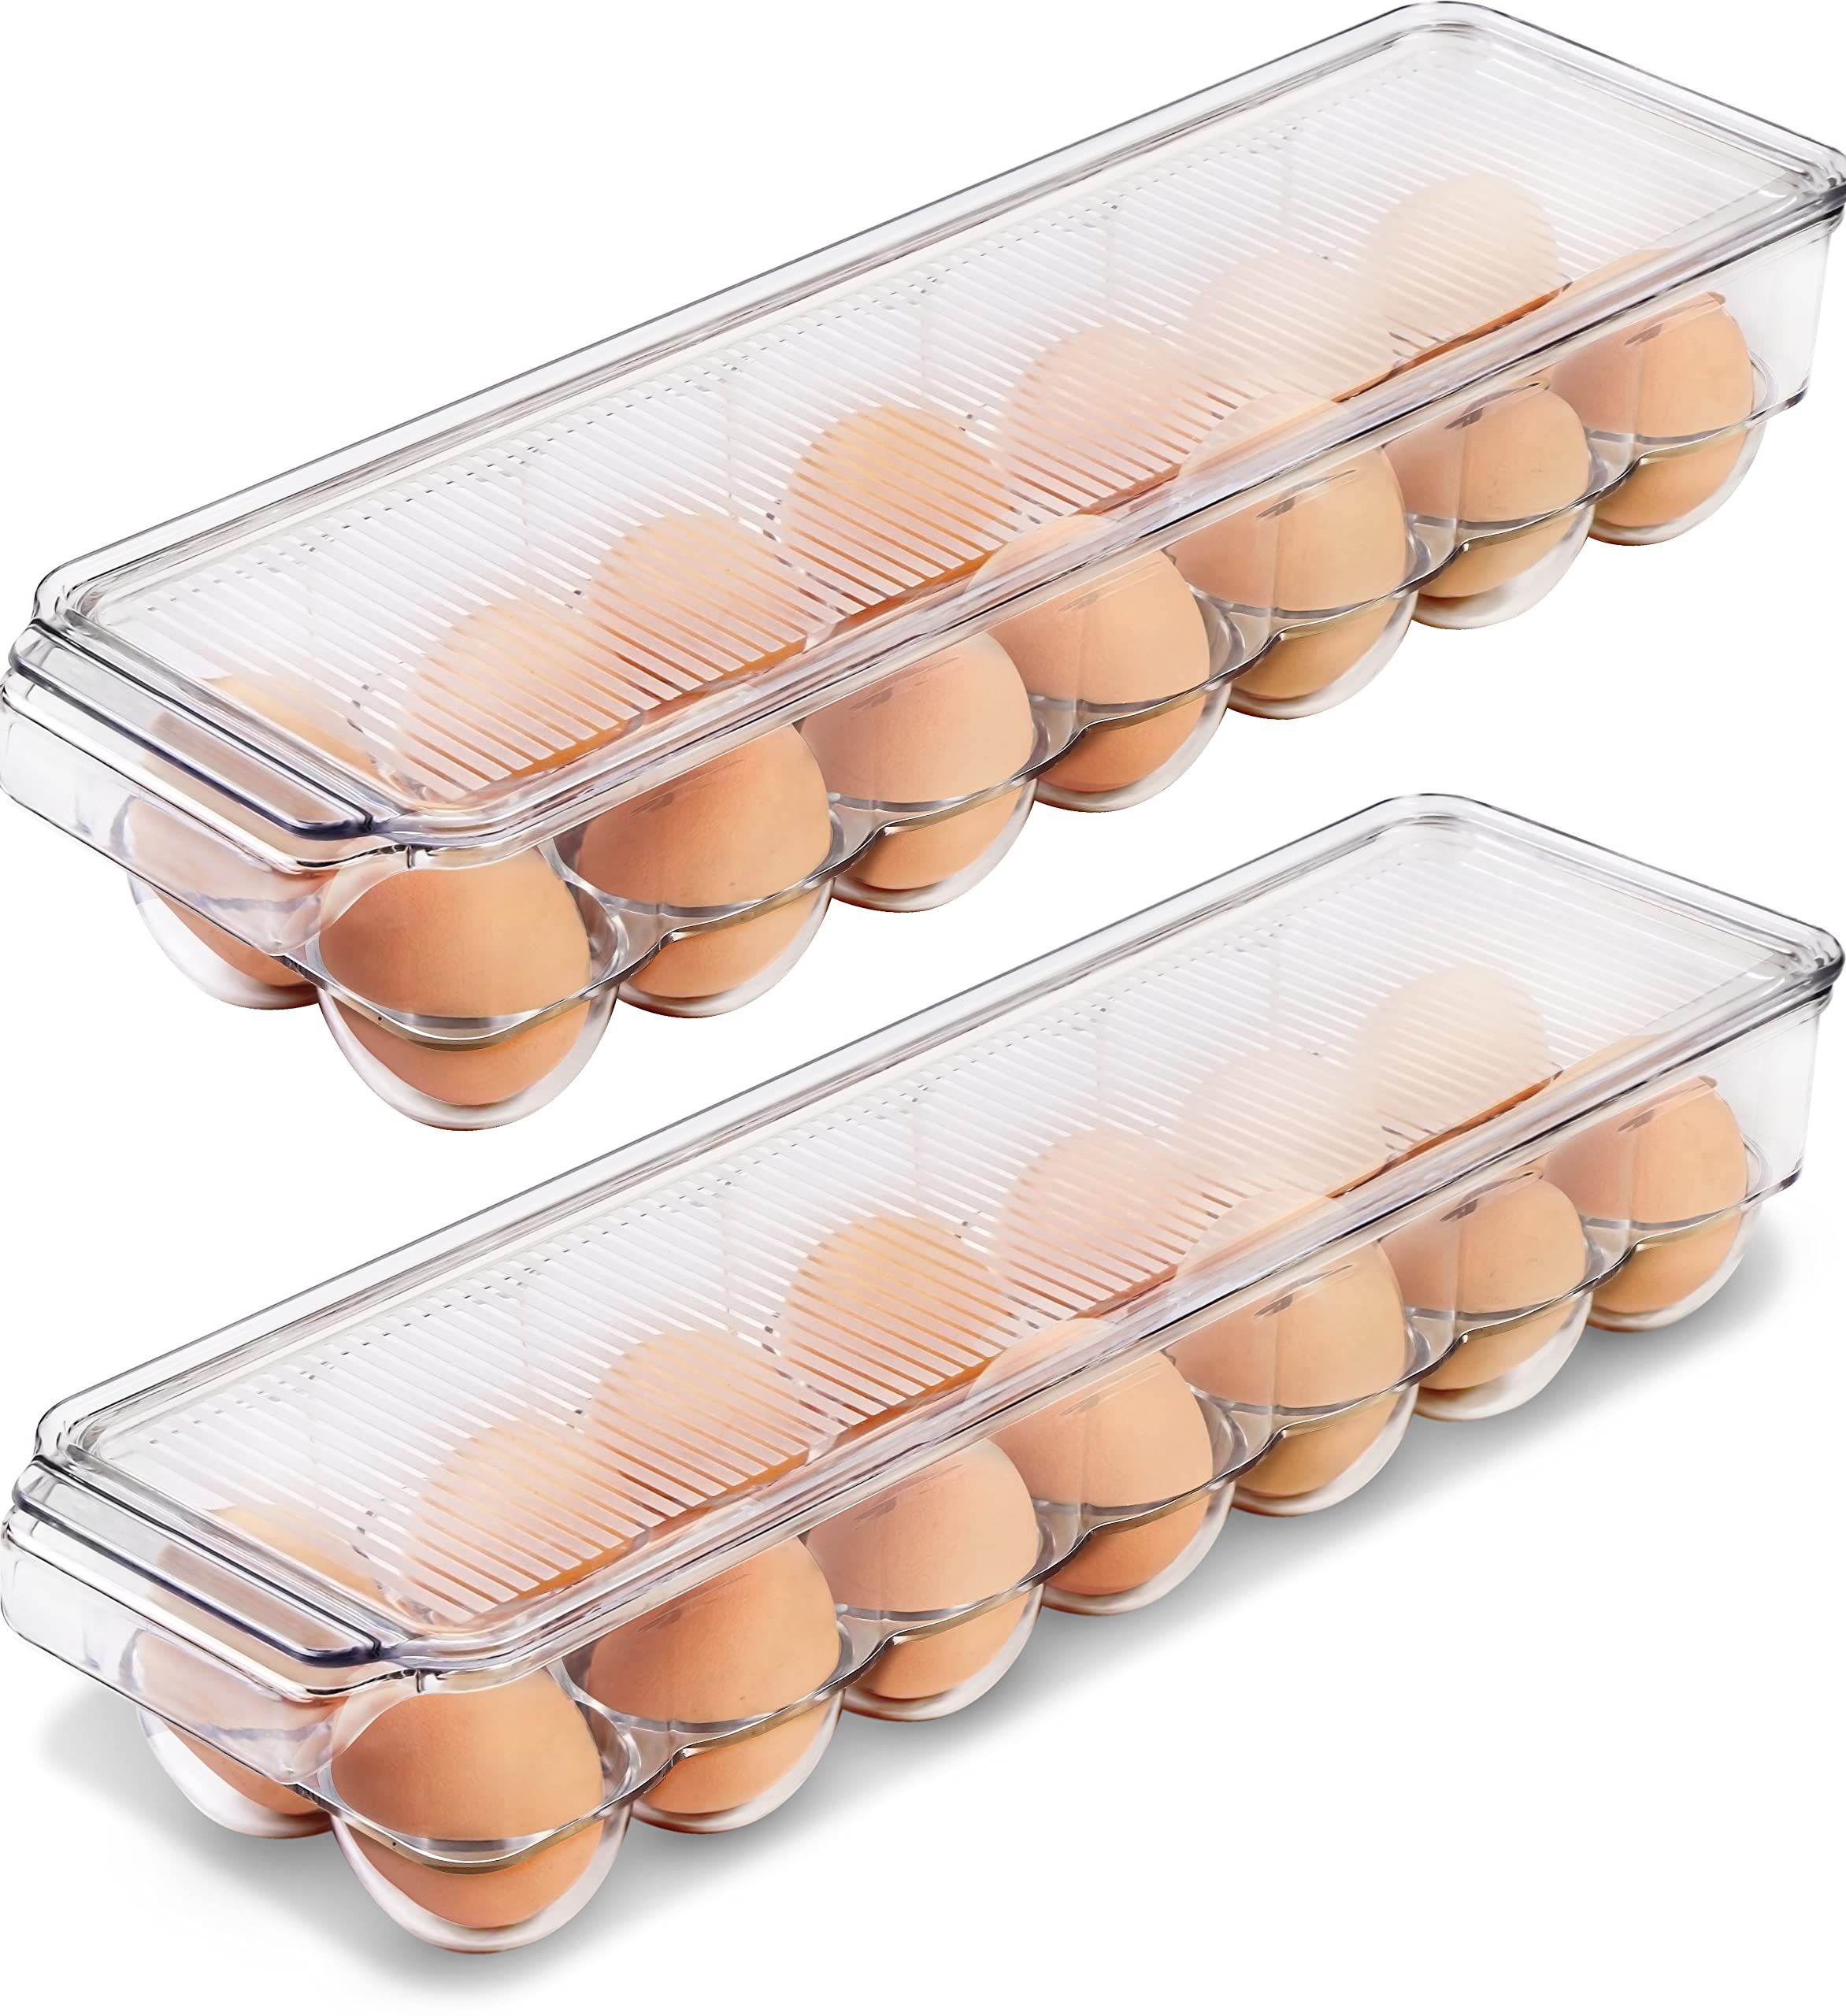 Utopia Home Egg Container For Refrigerator - 14 Egg Container With Lid & Handle, Egg Holder Stora... | Amazon (US)